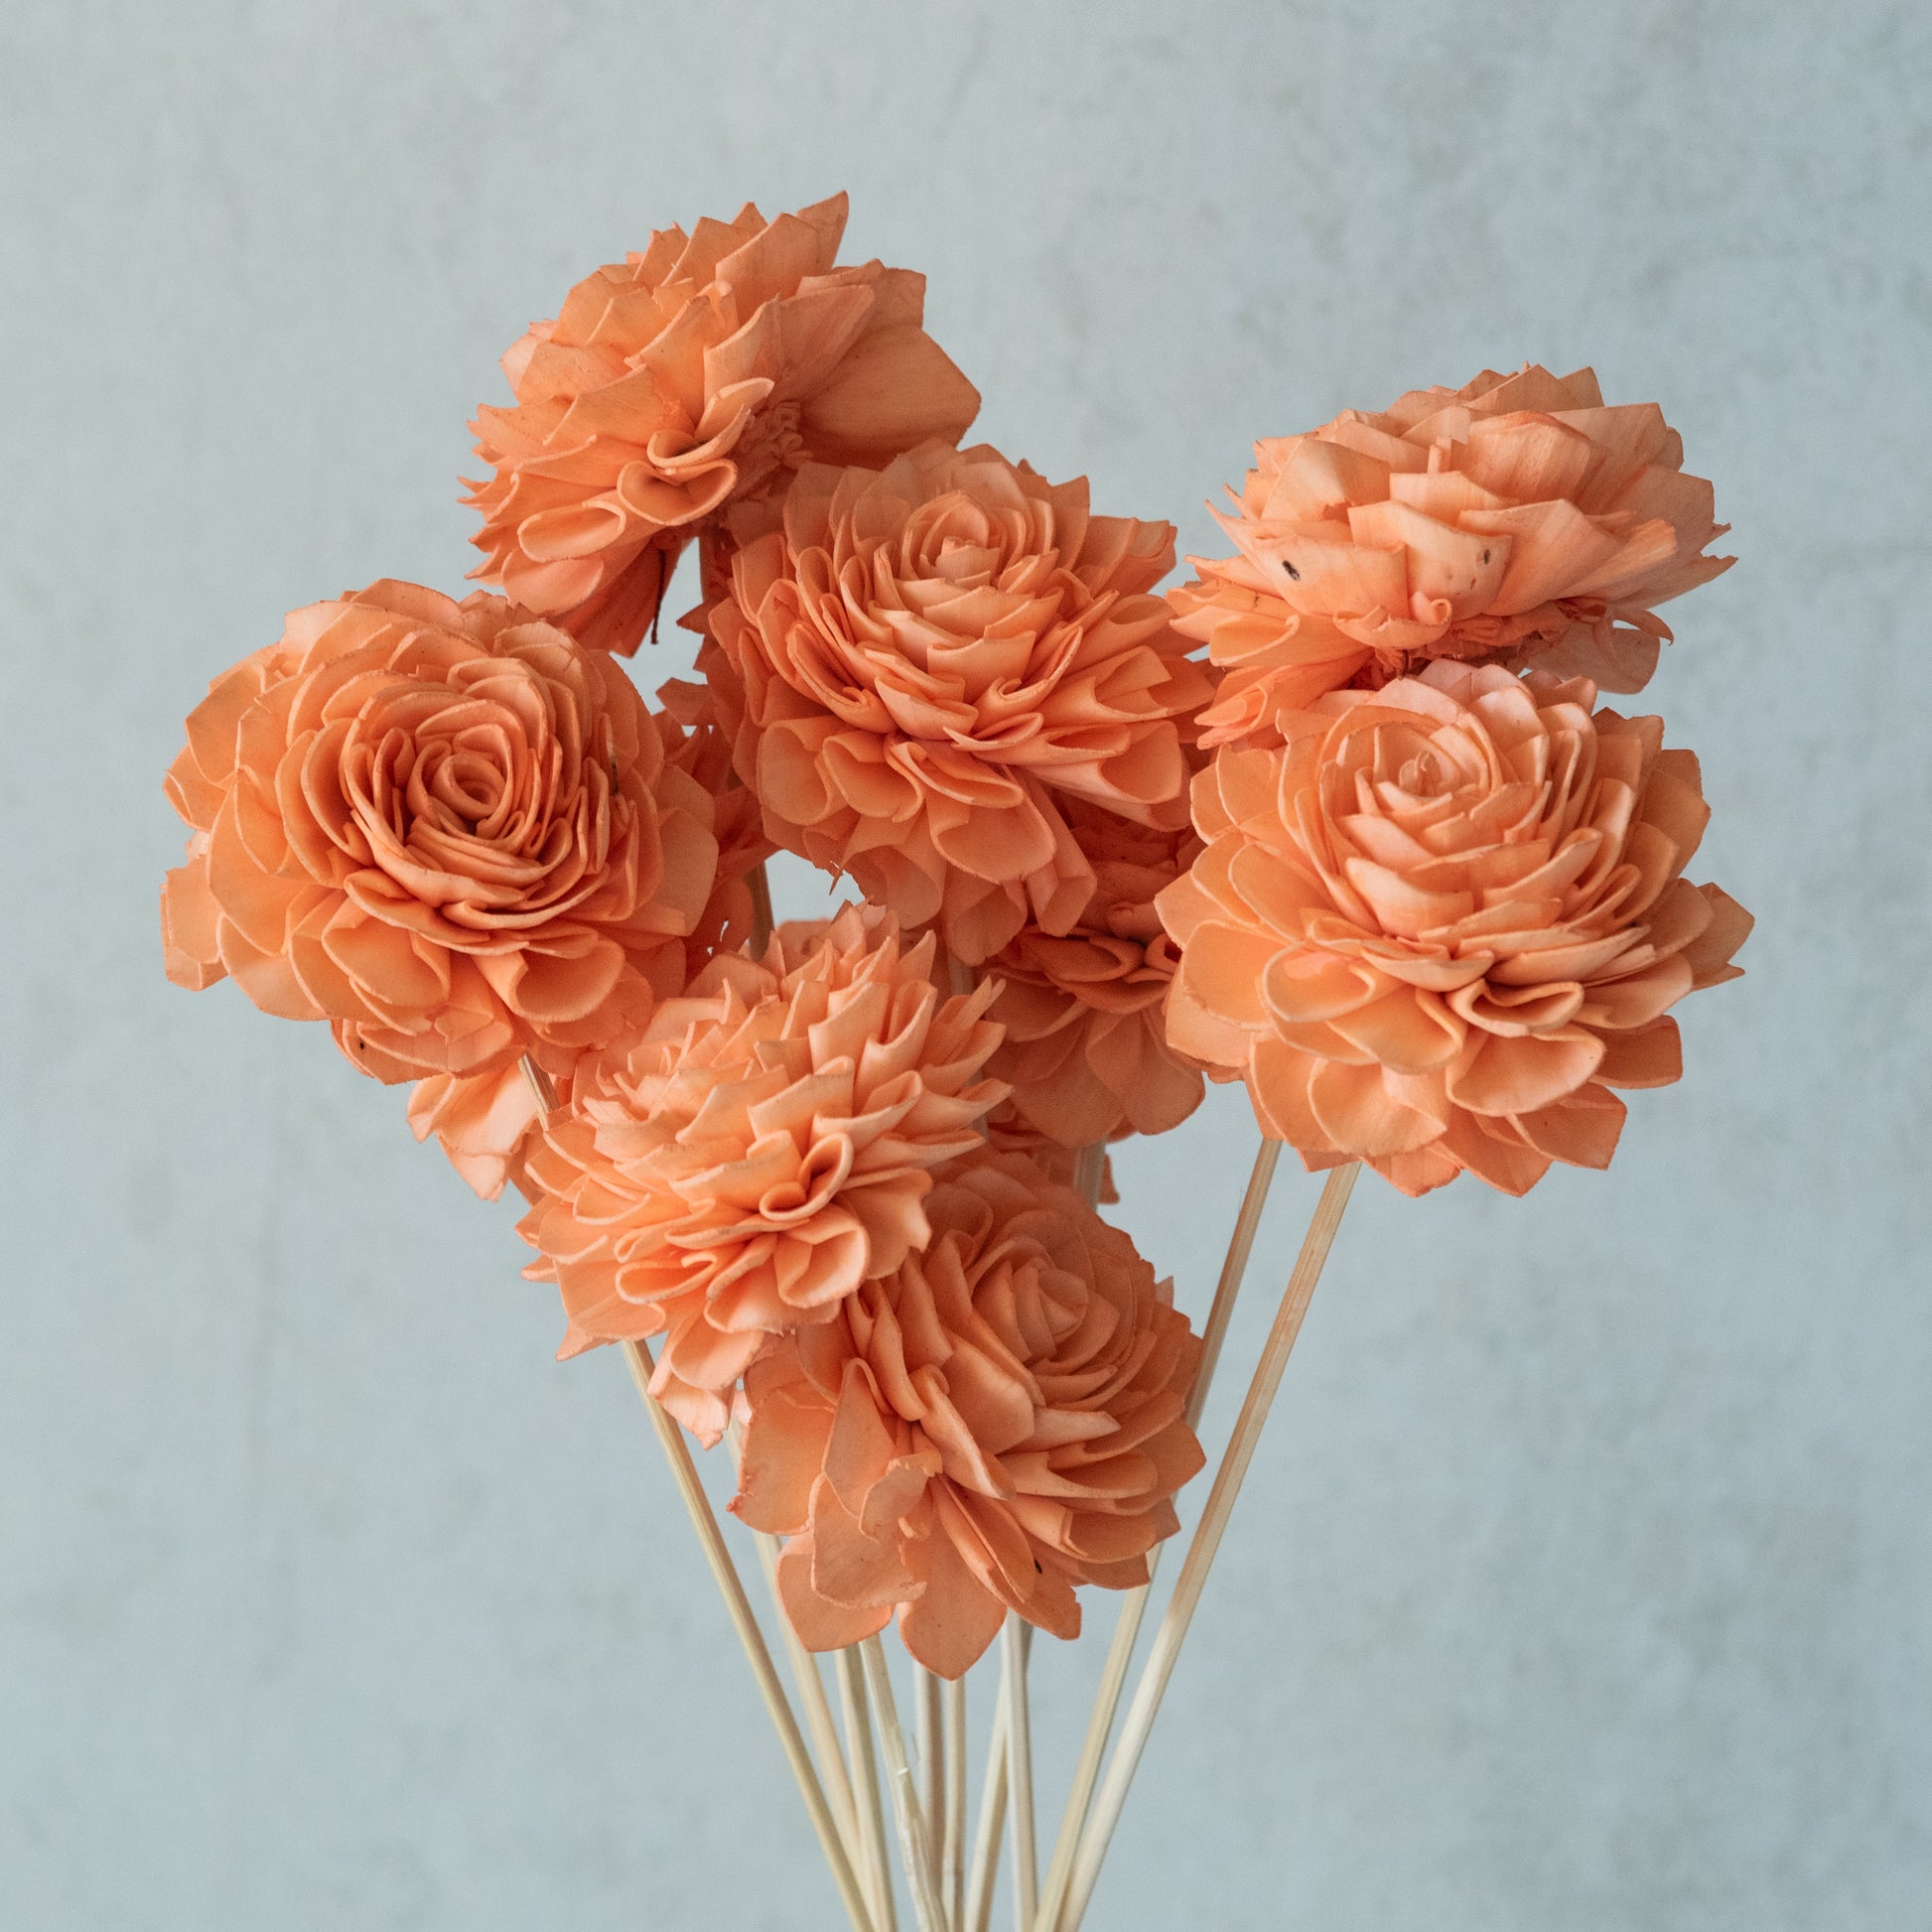 Peachy Sola Wood Flowers Sticks (10 Sticks) – Flowers and Fillers